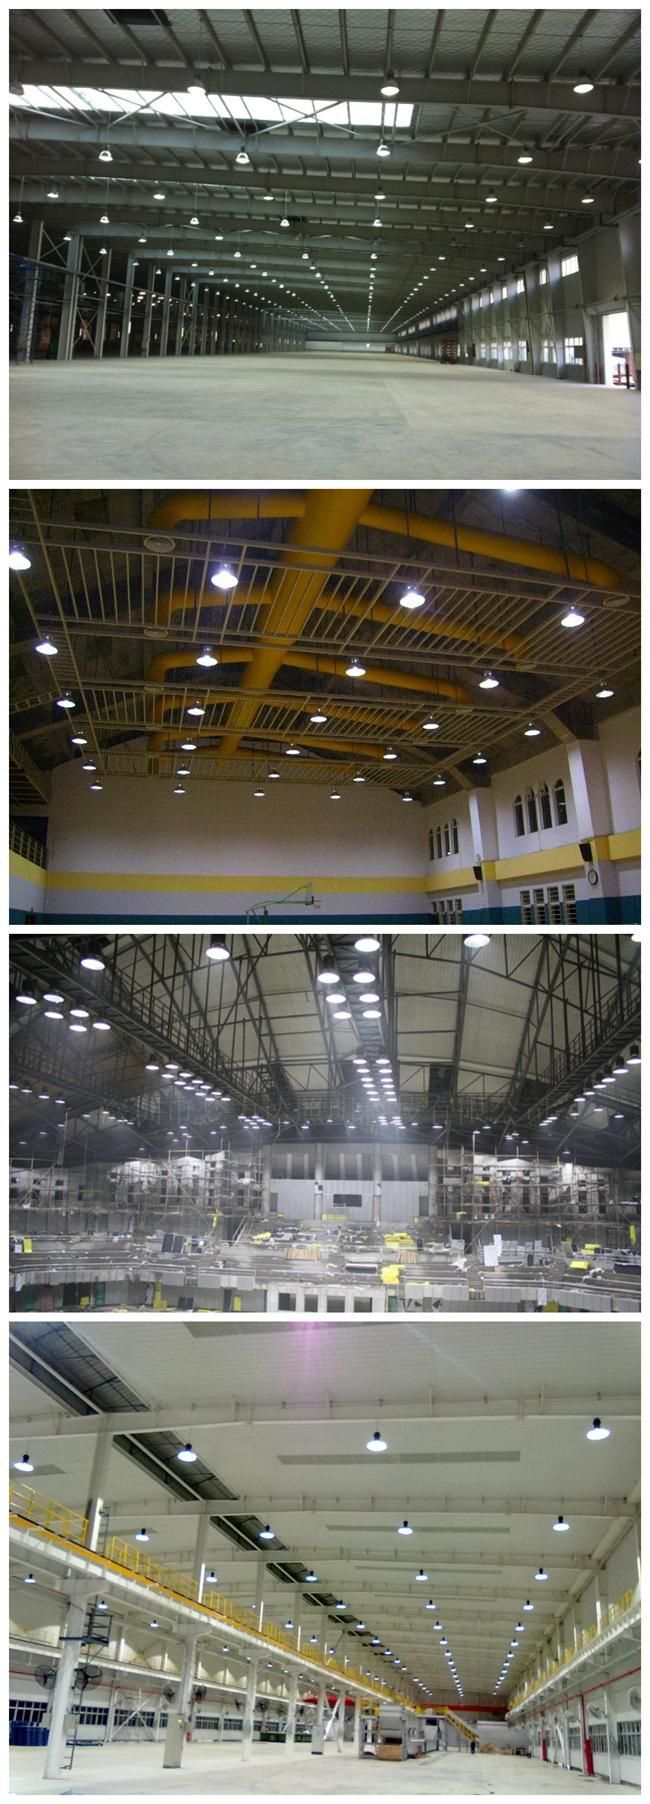 Super Bright Dimmable Supermarket Round Waterproof IP65 Lamp UFO LED High Bay Light 150W